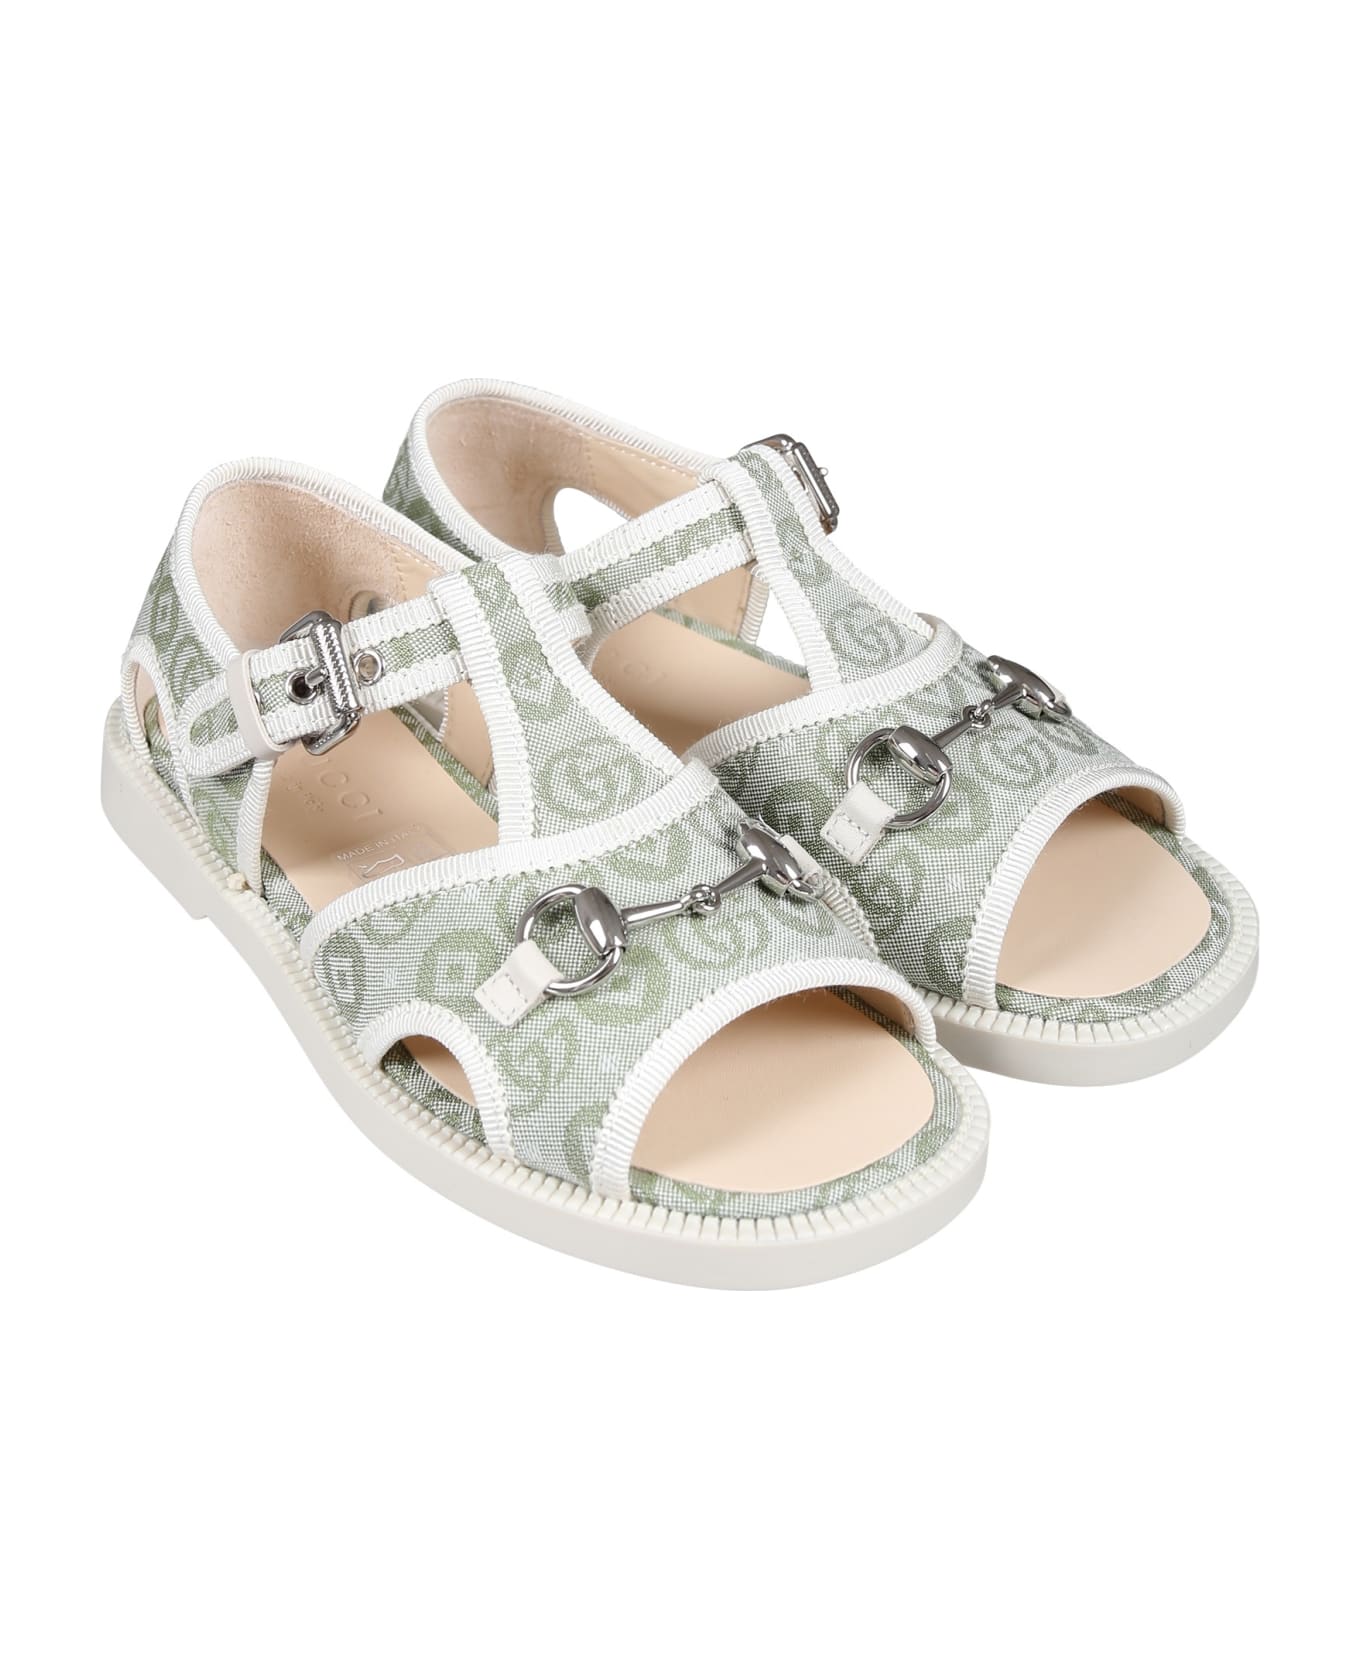 Gucci Green Sandals For Kids With Clamp - Green シューズ